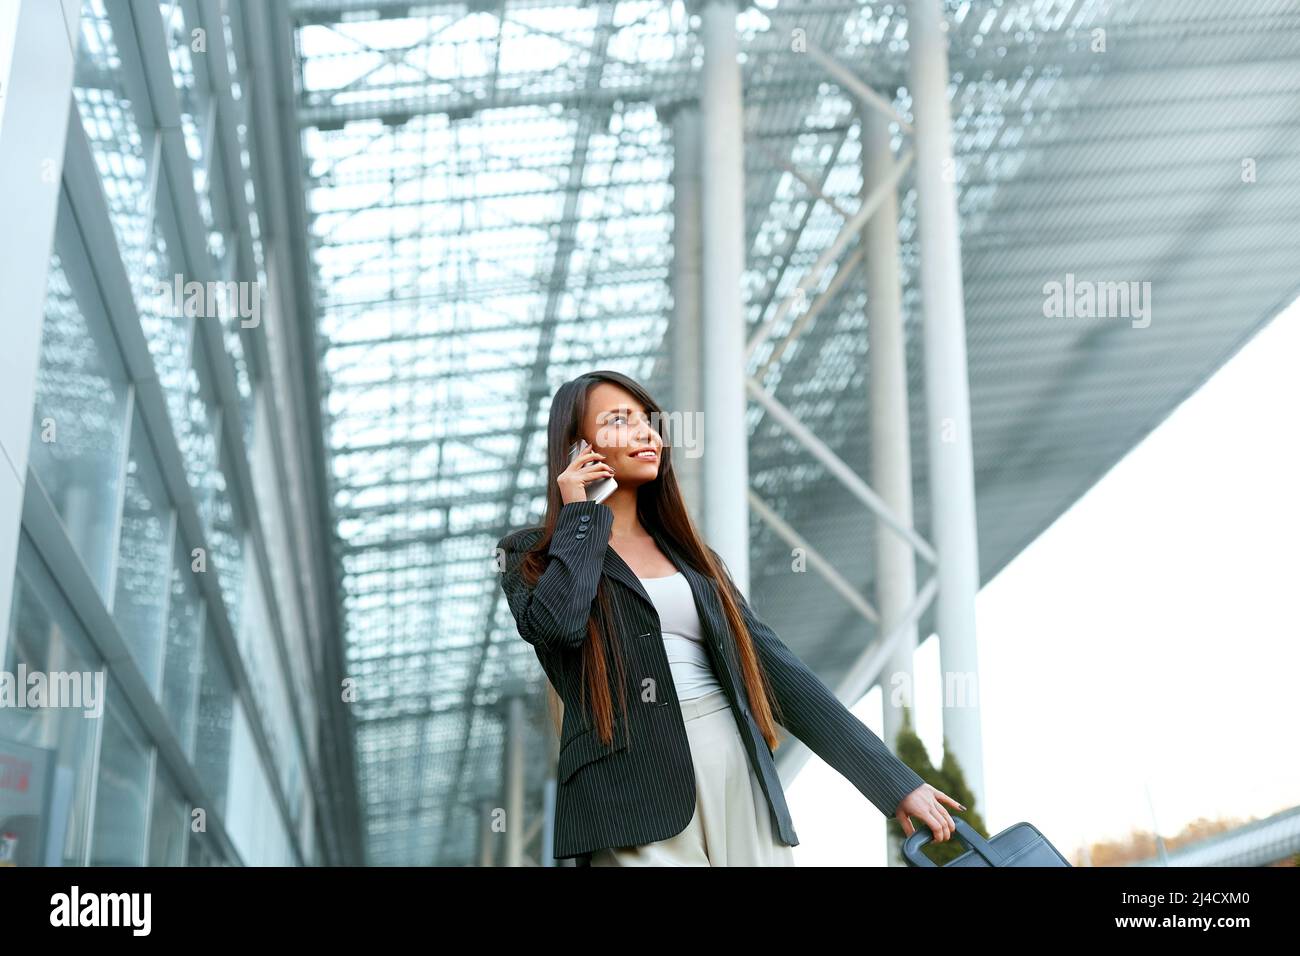 Beautiful Woman Talking On Phone Walking On Street. Portrait Of Business Woman Calling On Mobile Phone Near Office. Stock Photo